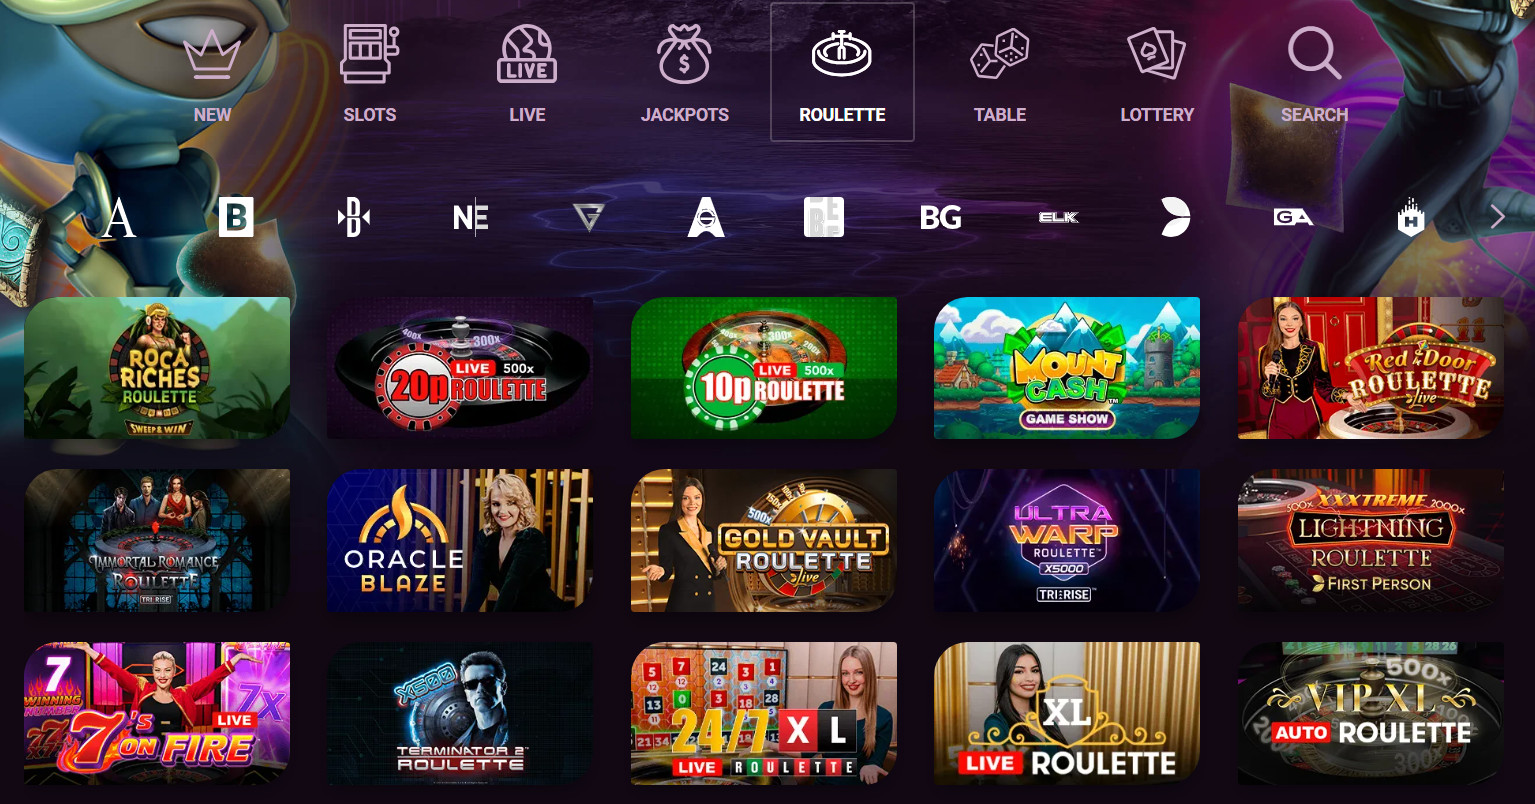 Roulette Section at Ricky Casino Screenshot